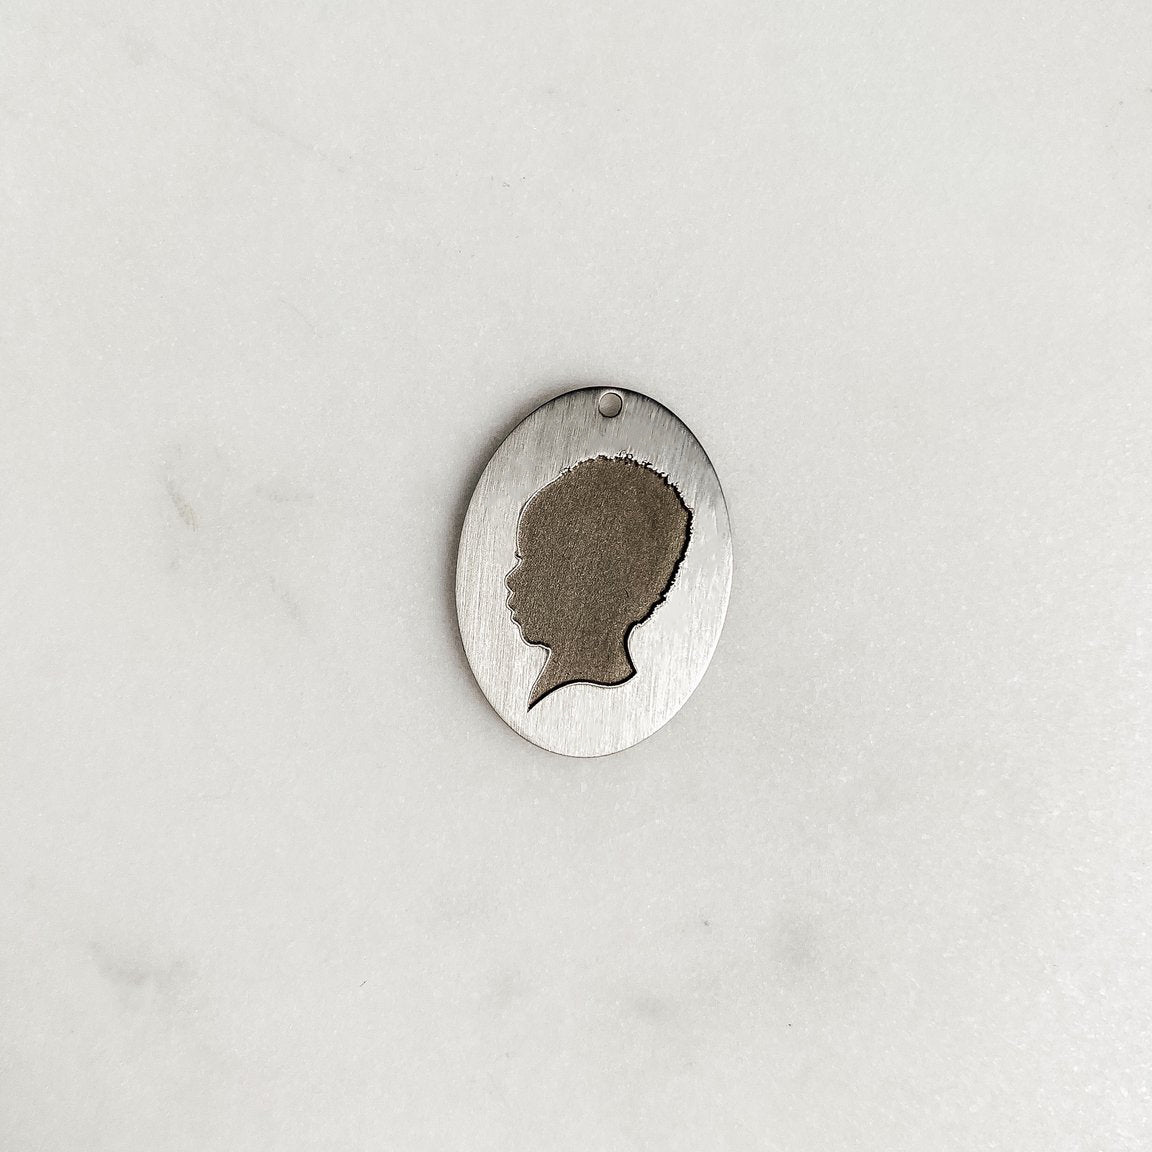 The *Statement* Silhouette Coin Charm